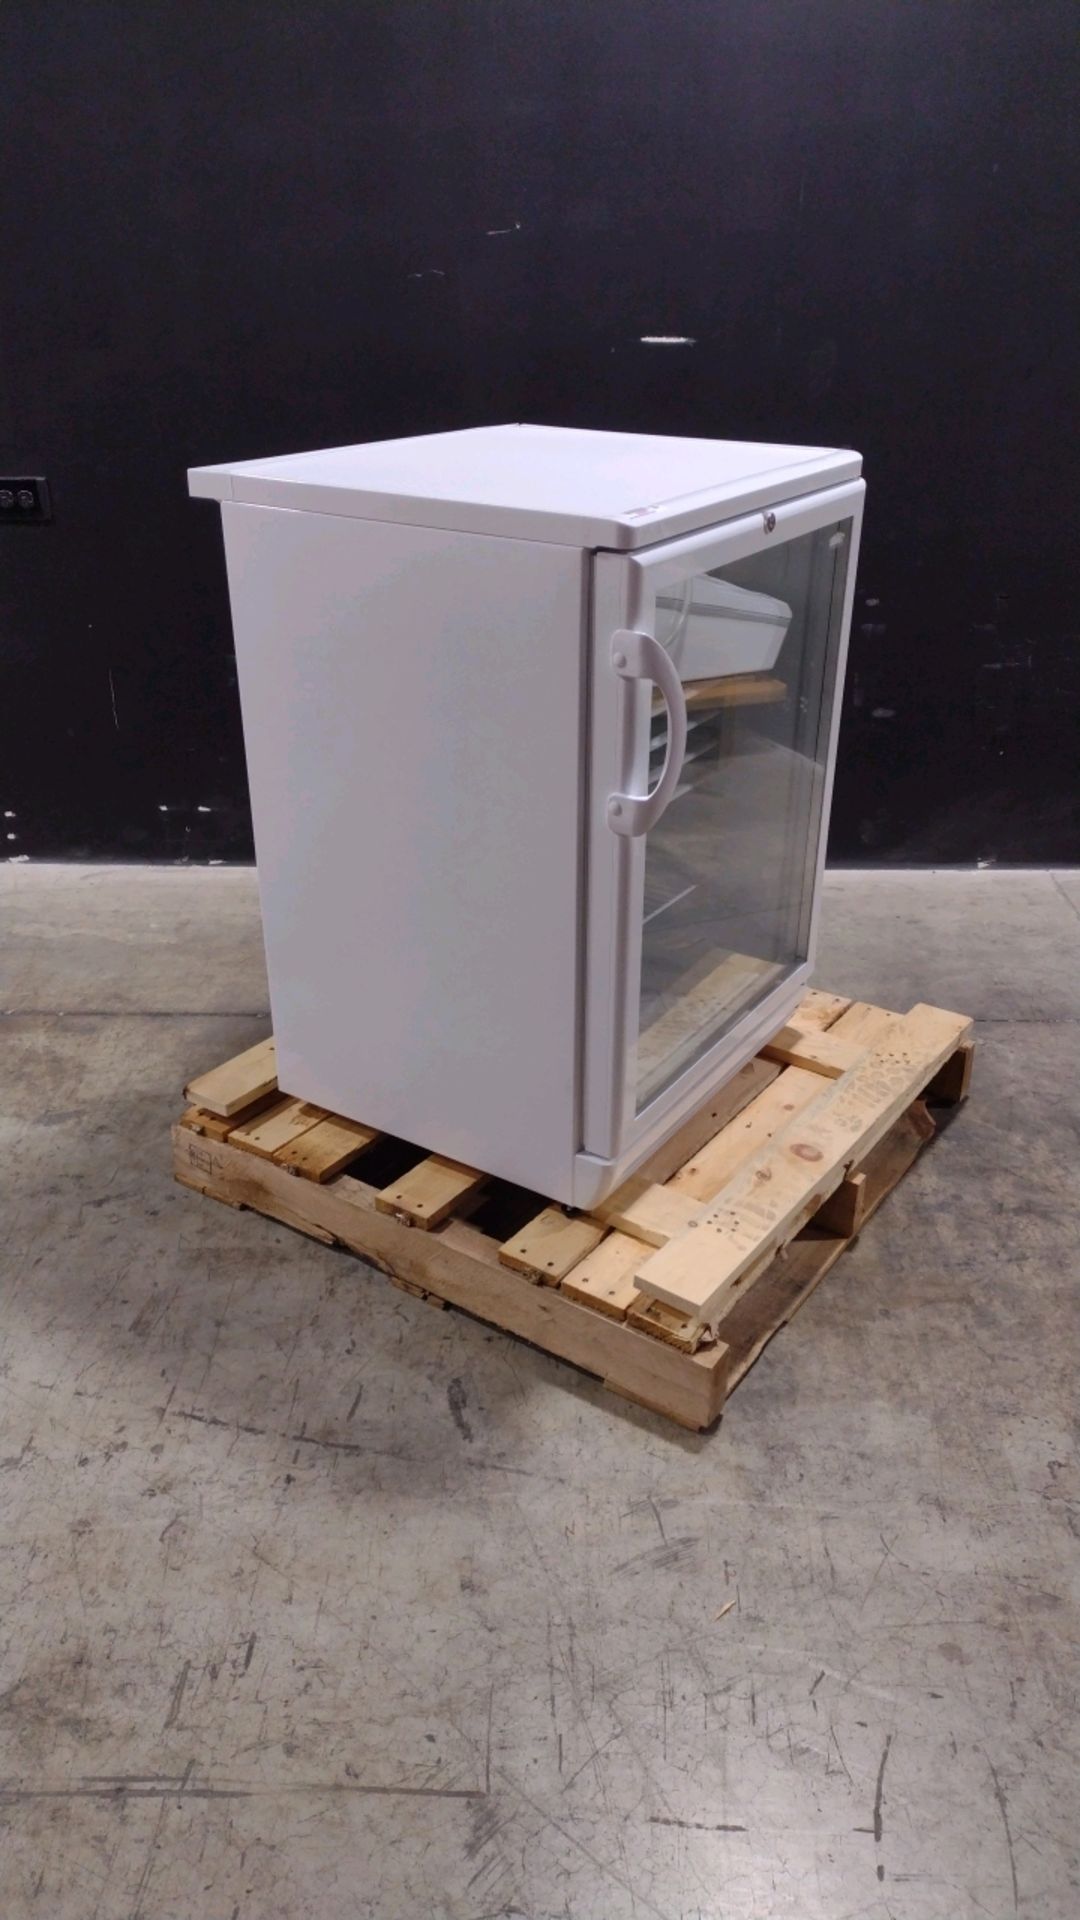 SUMMIT SCR600GL FRIDGE (LOCATED AT 3325 MOUNT PROSPECT ROAD, FRANKLIN PARK, IL, 60131) - Image 3 of 4